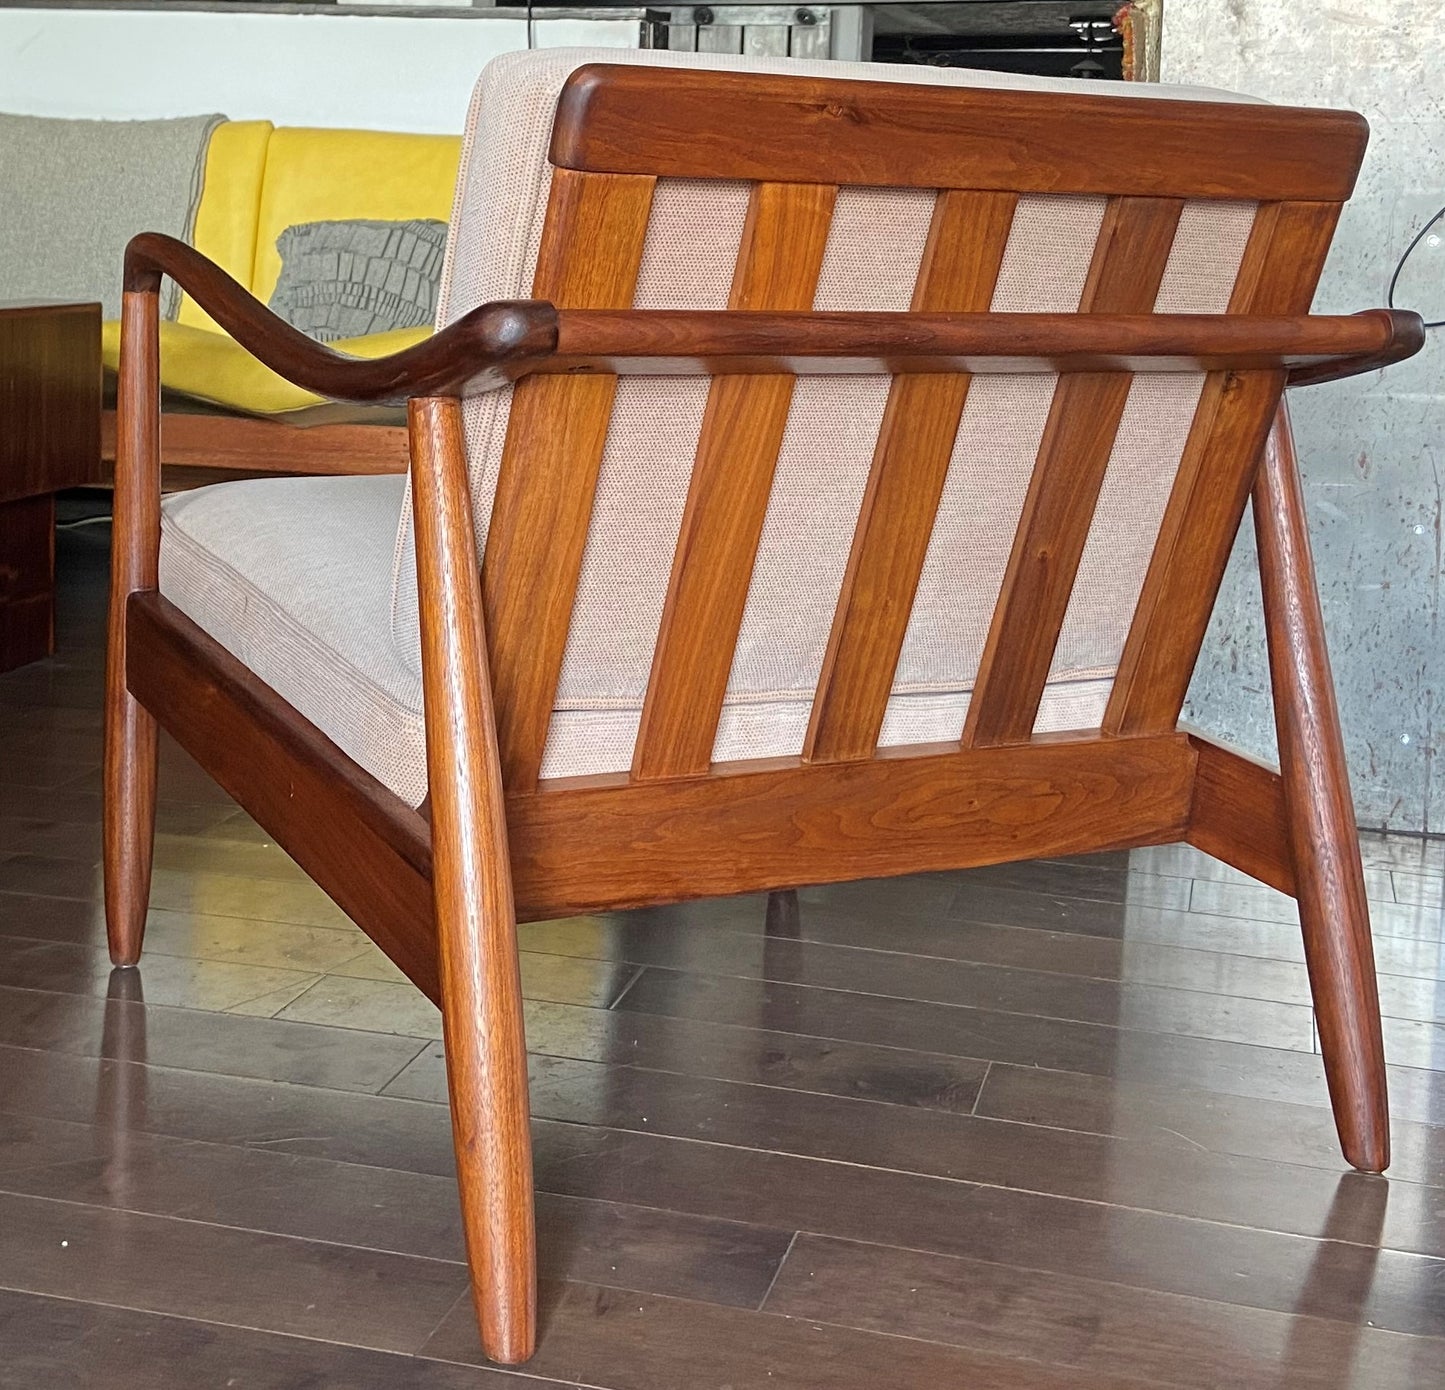 REFINISHED MCM Lounge Chair PERFECT